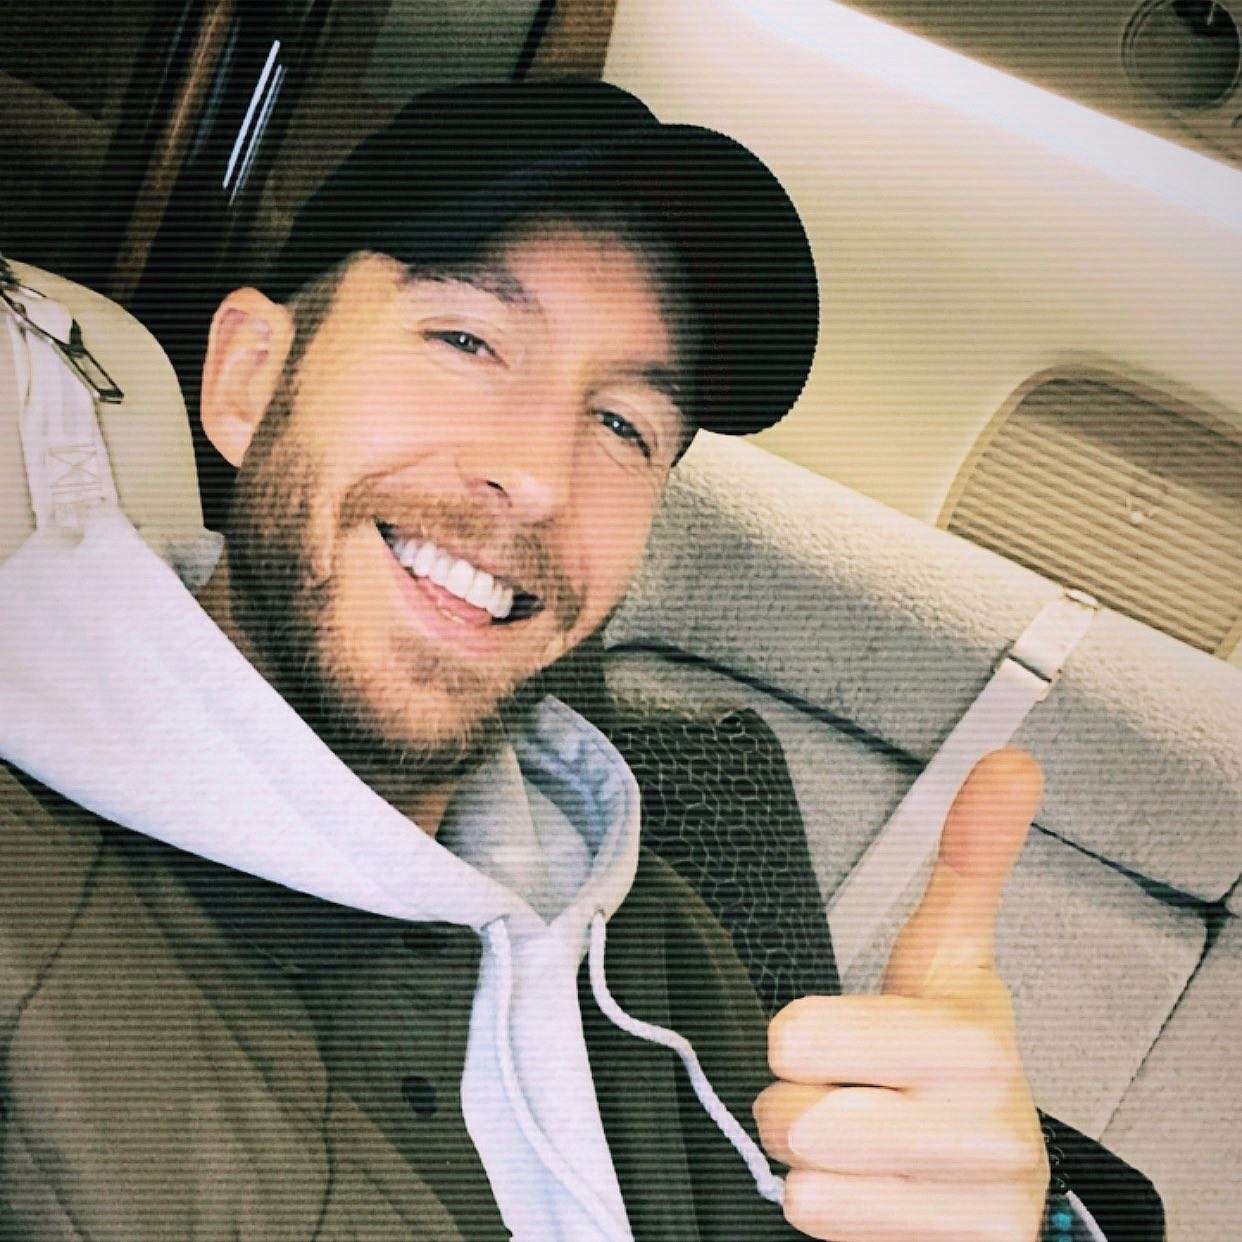 Calvin Harris Biography: Age, Net Worth, Parents, Siblings, Children, Spouse, Instagram, Height, Wiki